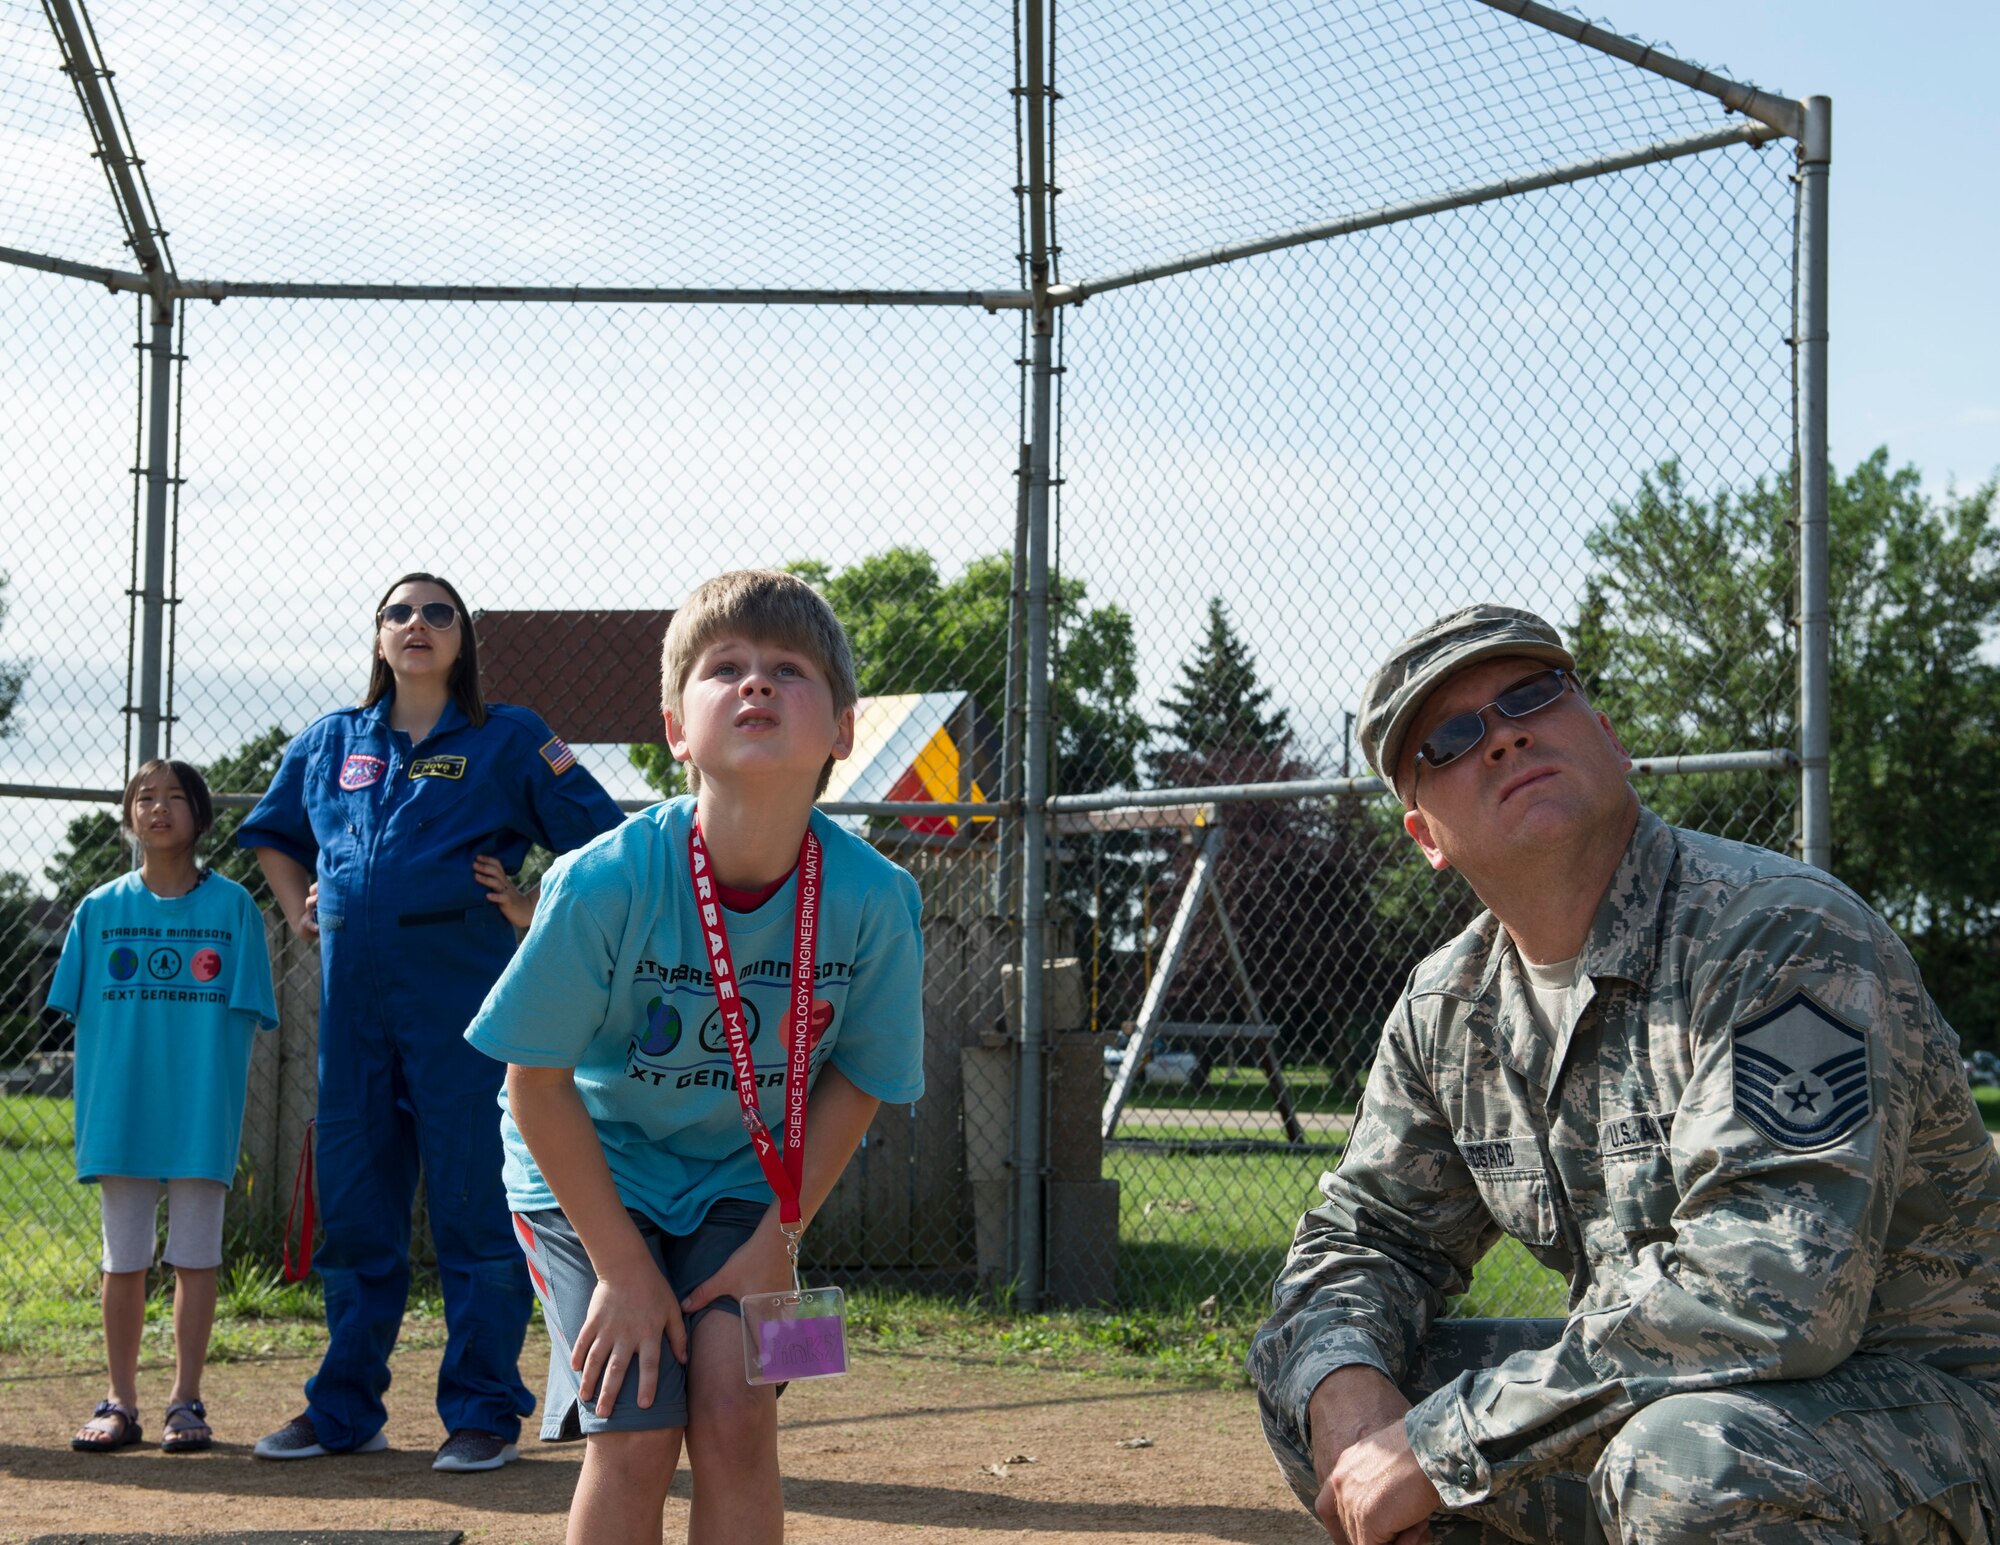 U.S. Air Force Master Sgt. Jeremy Bundgard, 133rd Logistics Readiness Squadron, volunteers for STARBASE Minnesota’s rocket launches in St. Paul, Minn., July 18, 2019.